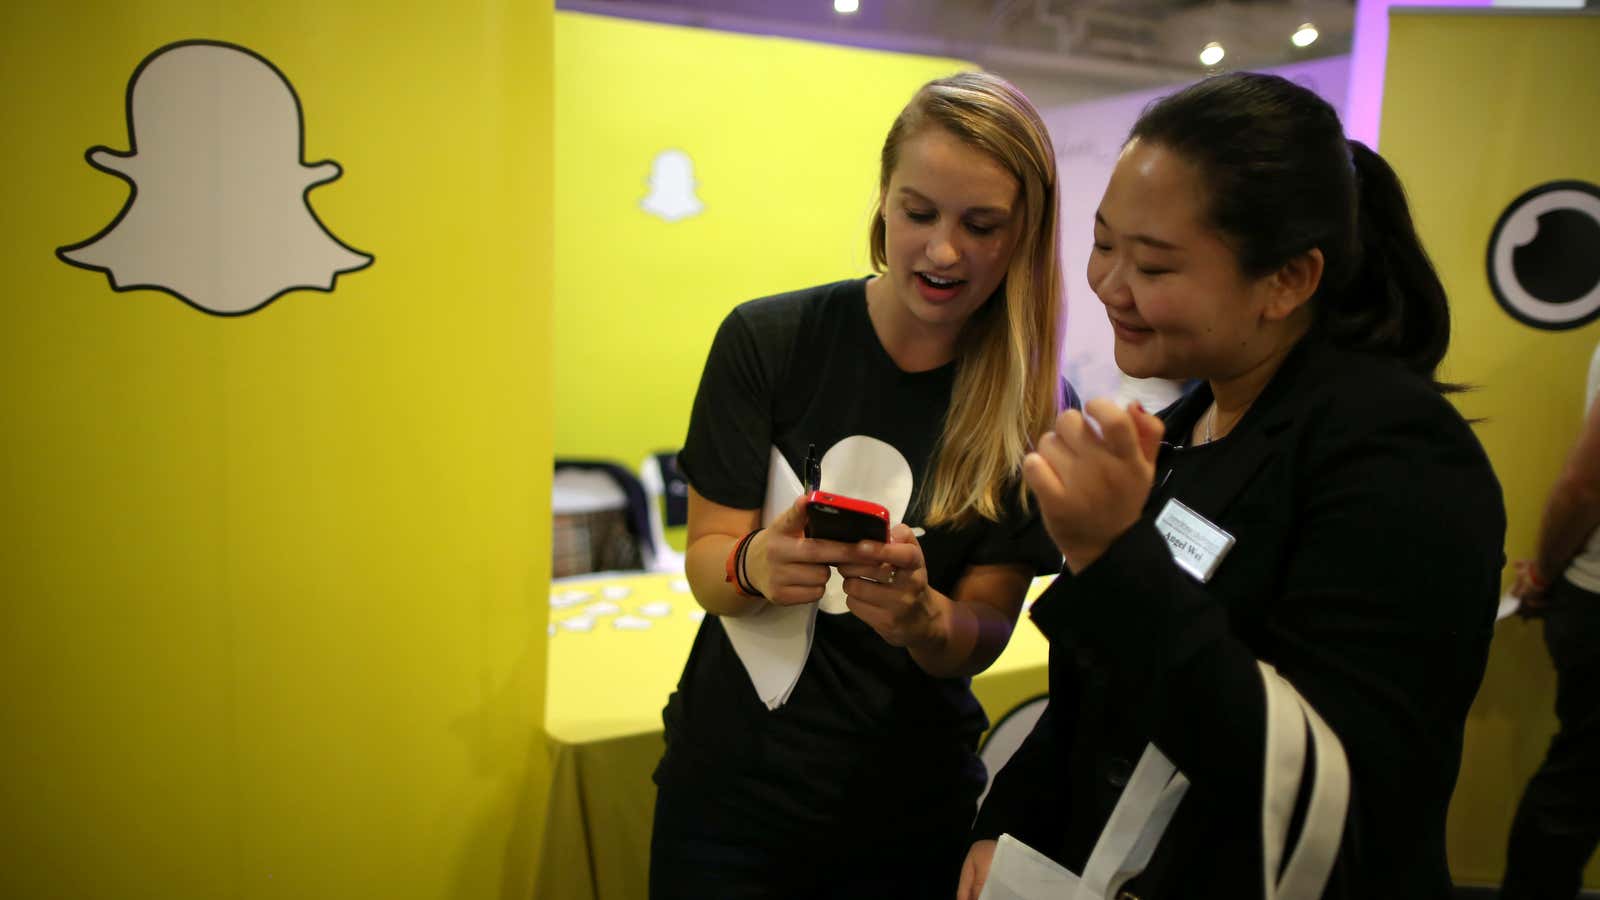 Sarah Buck, 23, (L) recruiter for messaging app Snapchat, talks to job seekers at a booth at TechFair LA, a technology job fair, in Los Angeles, California, U.S., January 26, 2017. REUTERS/Lucy Nicholson – RC19000ACCF0